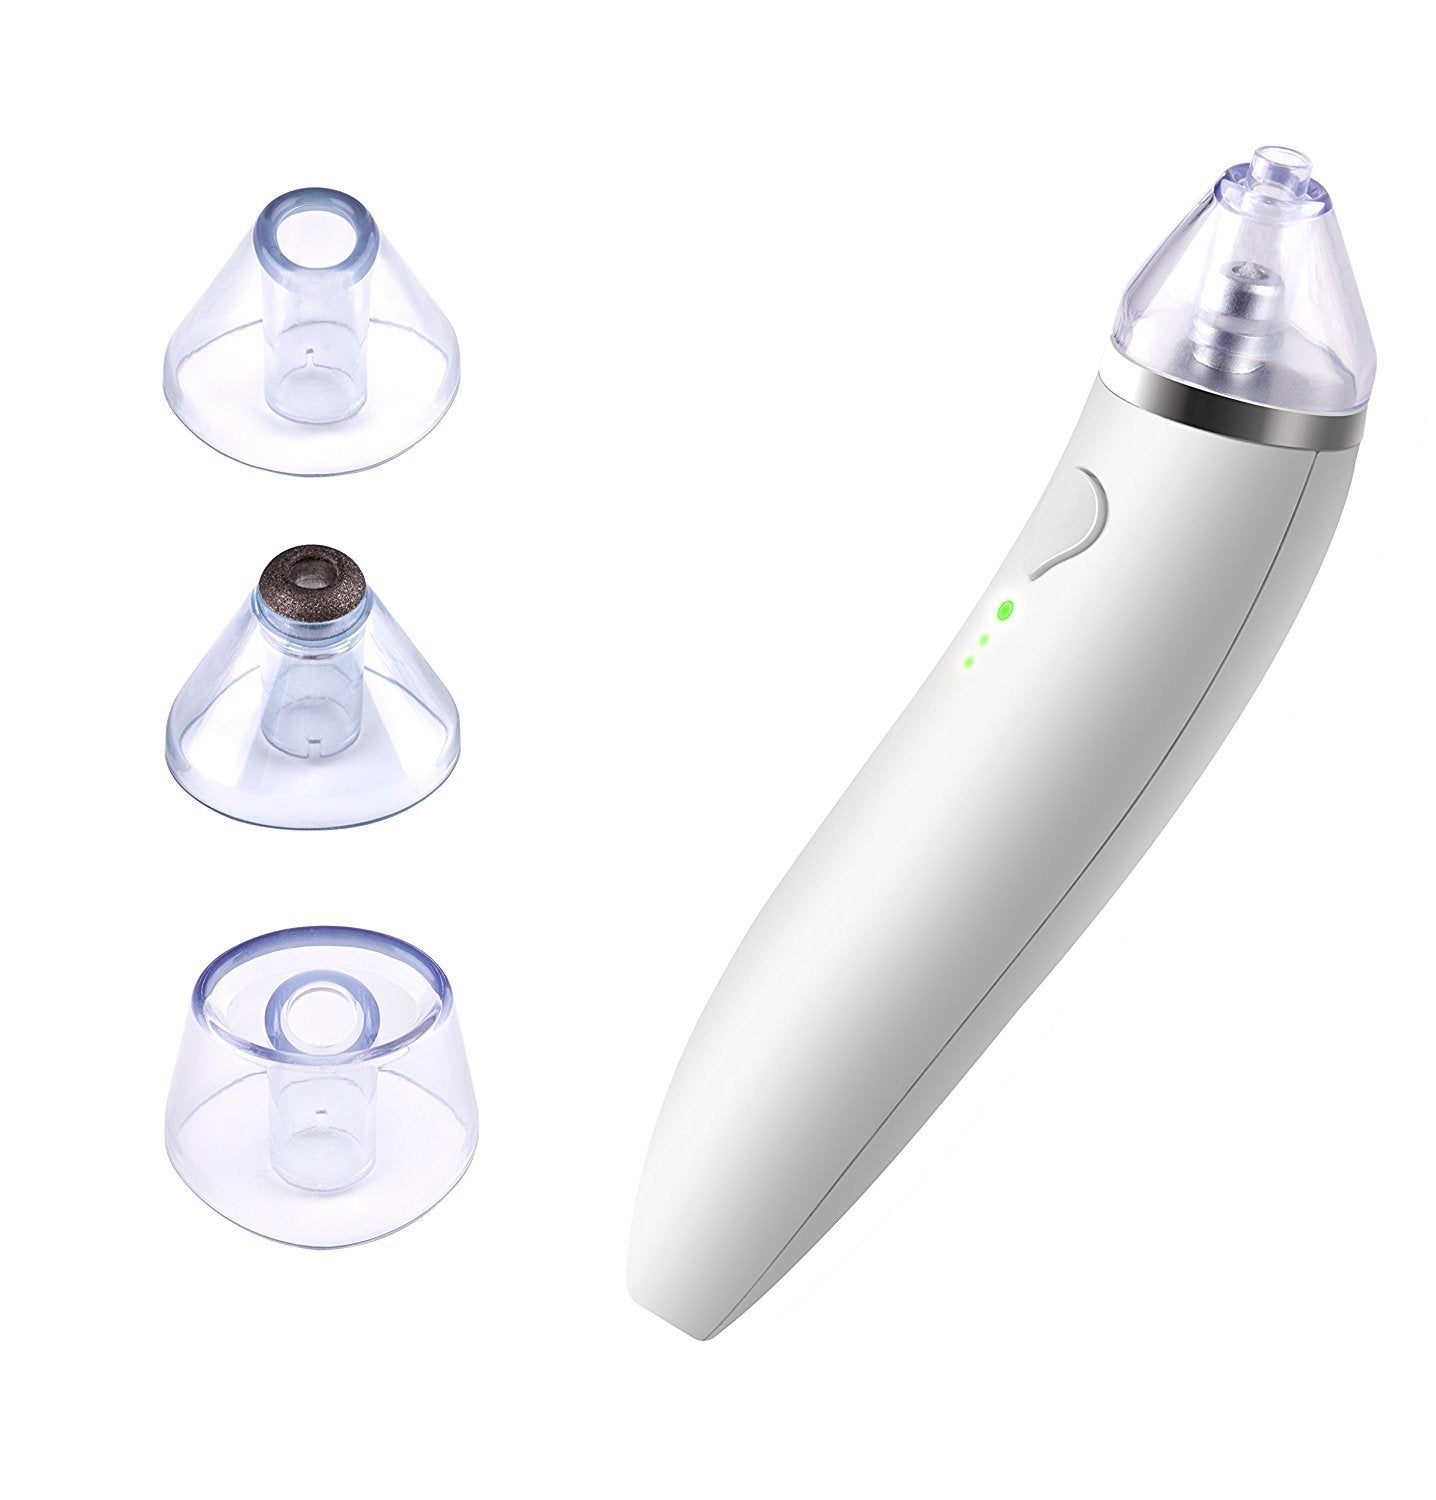 Mini Portable Facial Pore Cleanser Cleaner Face Blackhead Acne Remover Skin Cleansing Tool Blackhead Cleaner Remover